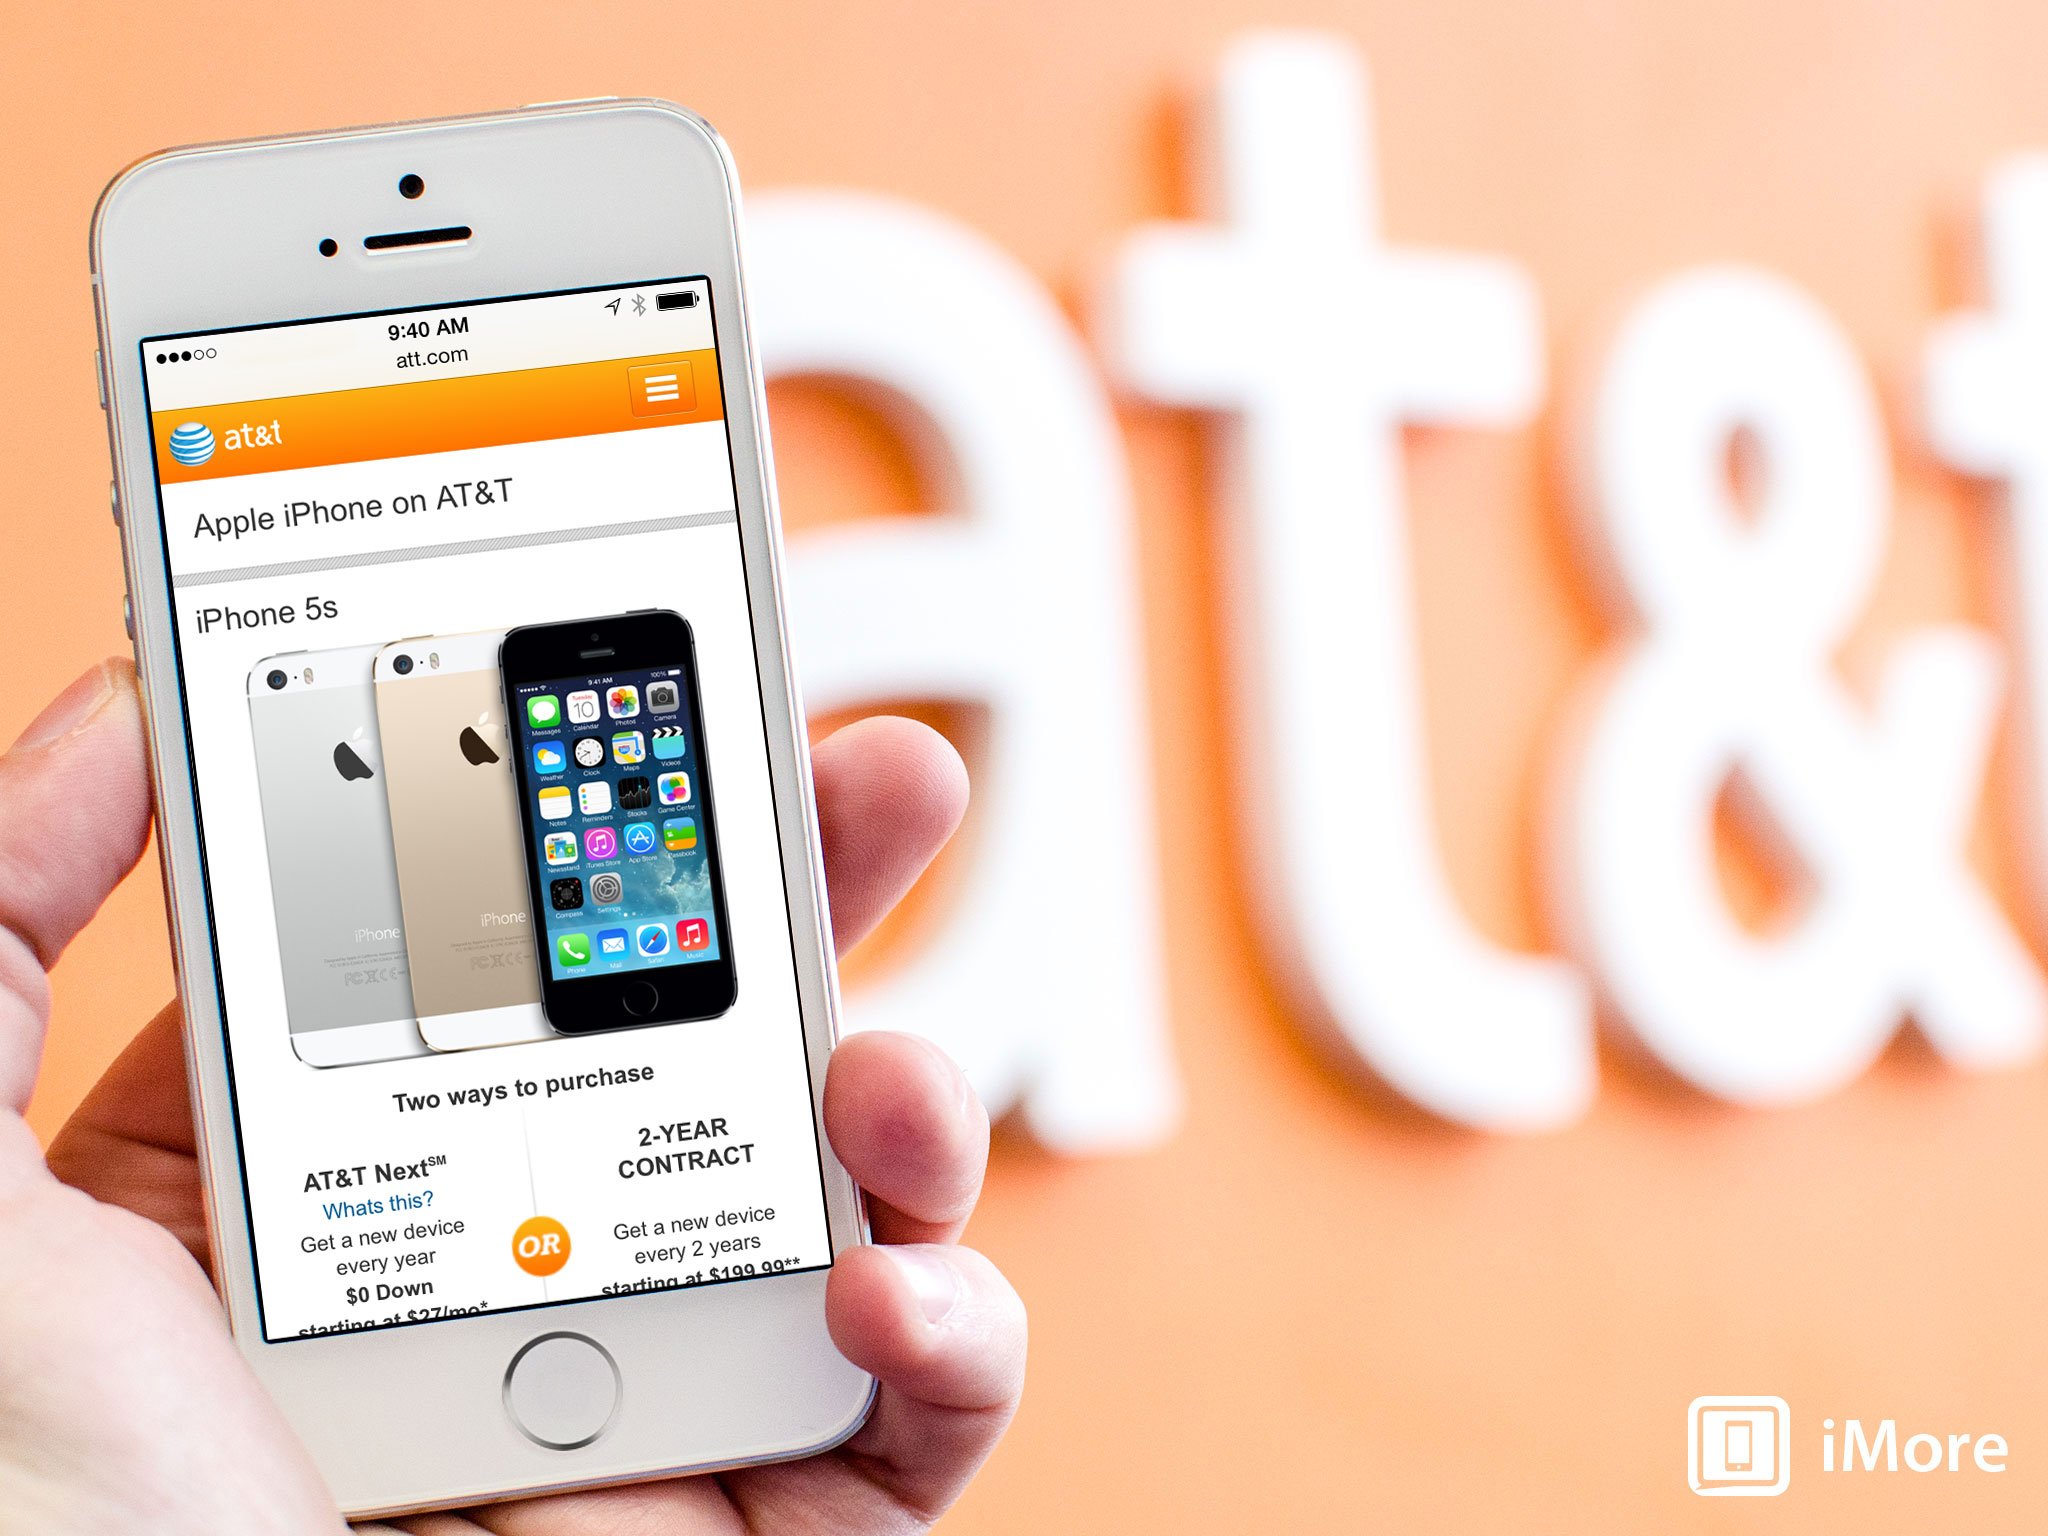 AT&T introduces new Mobile Share Value plans with 'no contract' option, promised savings